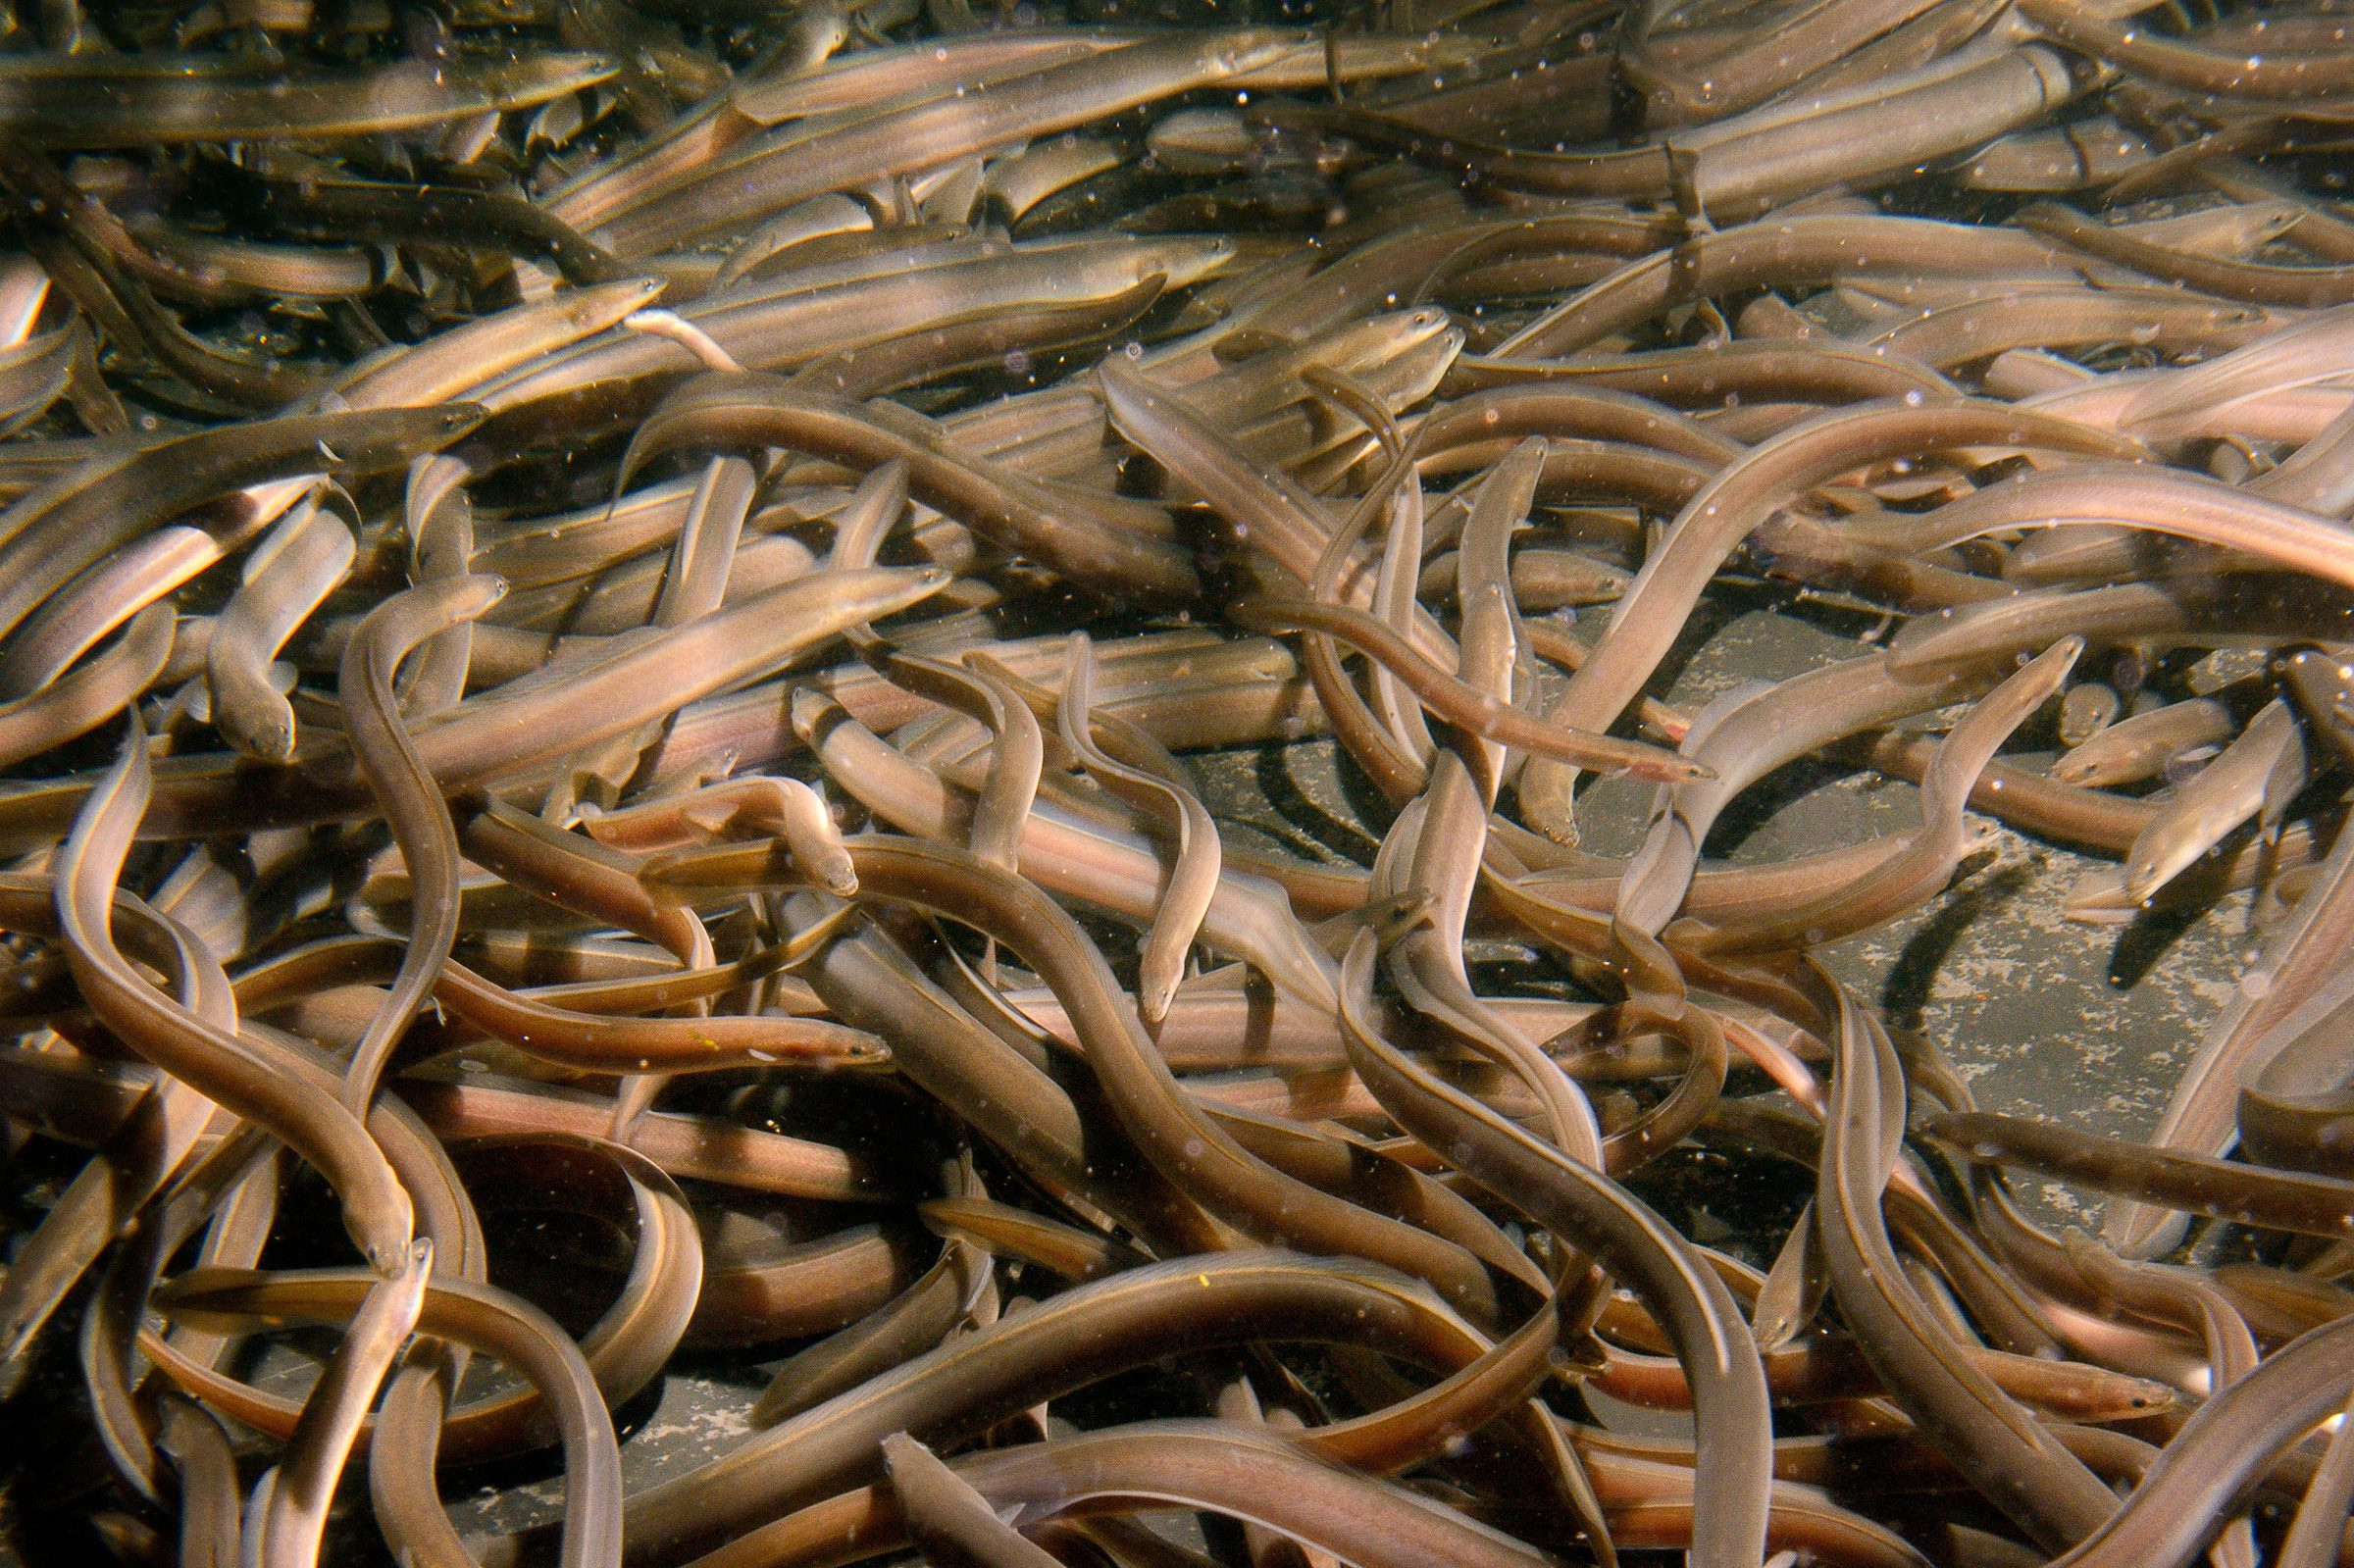 European eel elvers for a reintroduction swimming in a large holding tank in Gloucester, U.K.